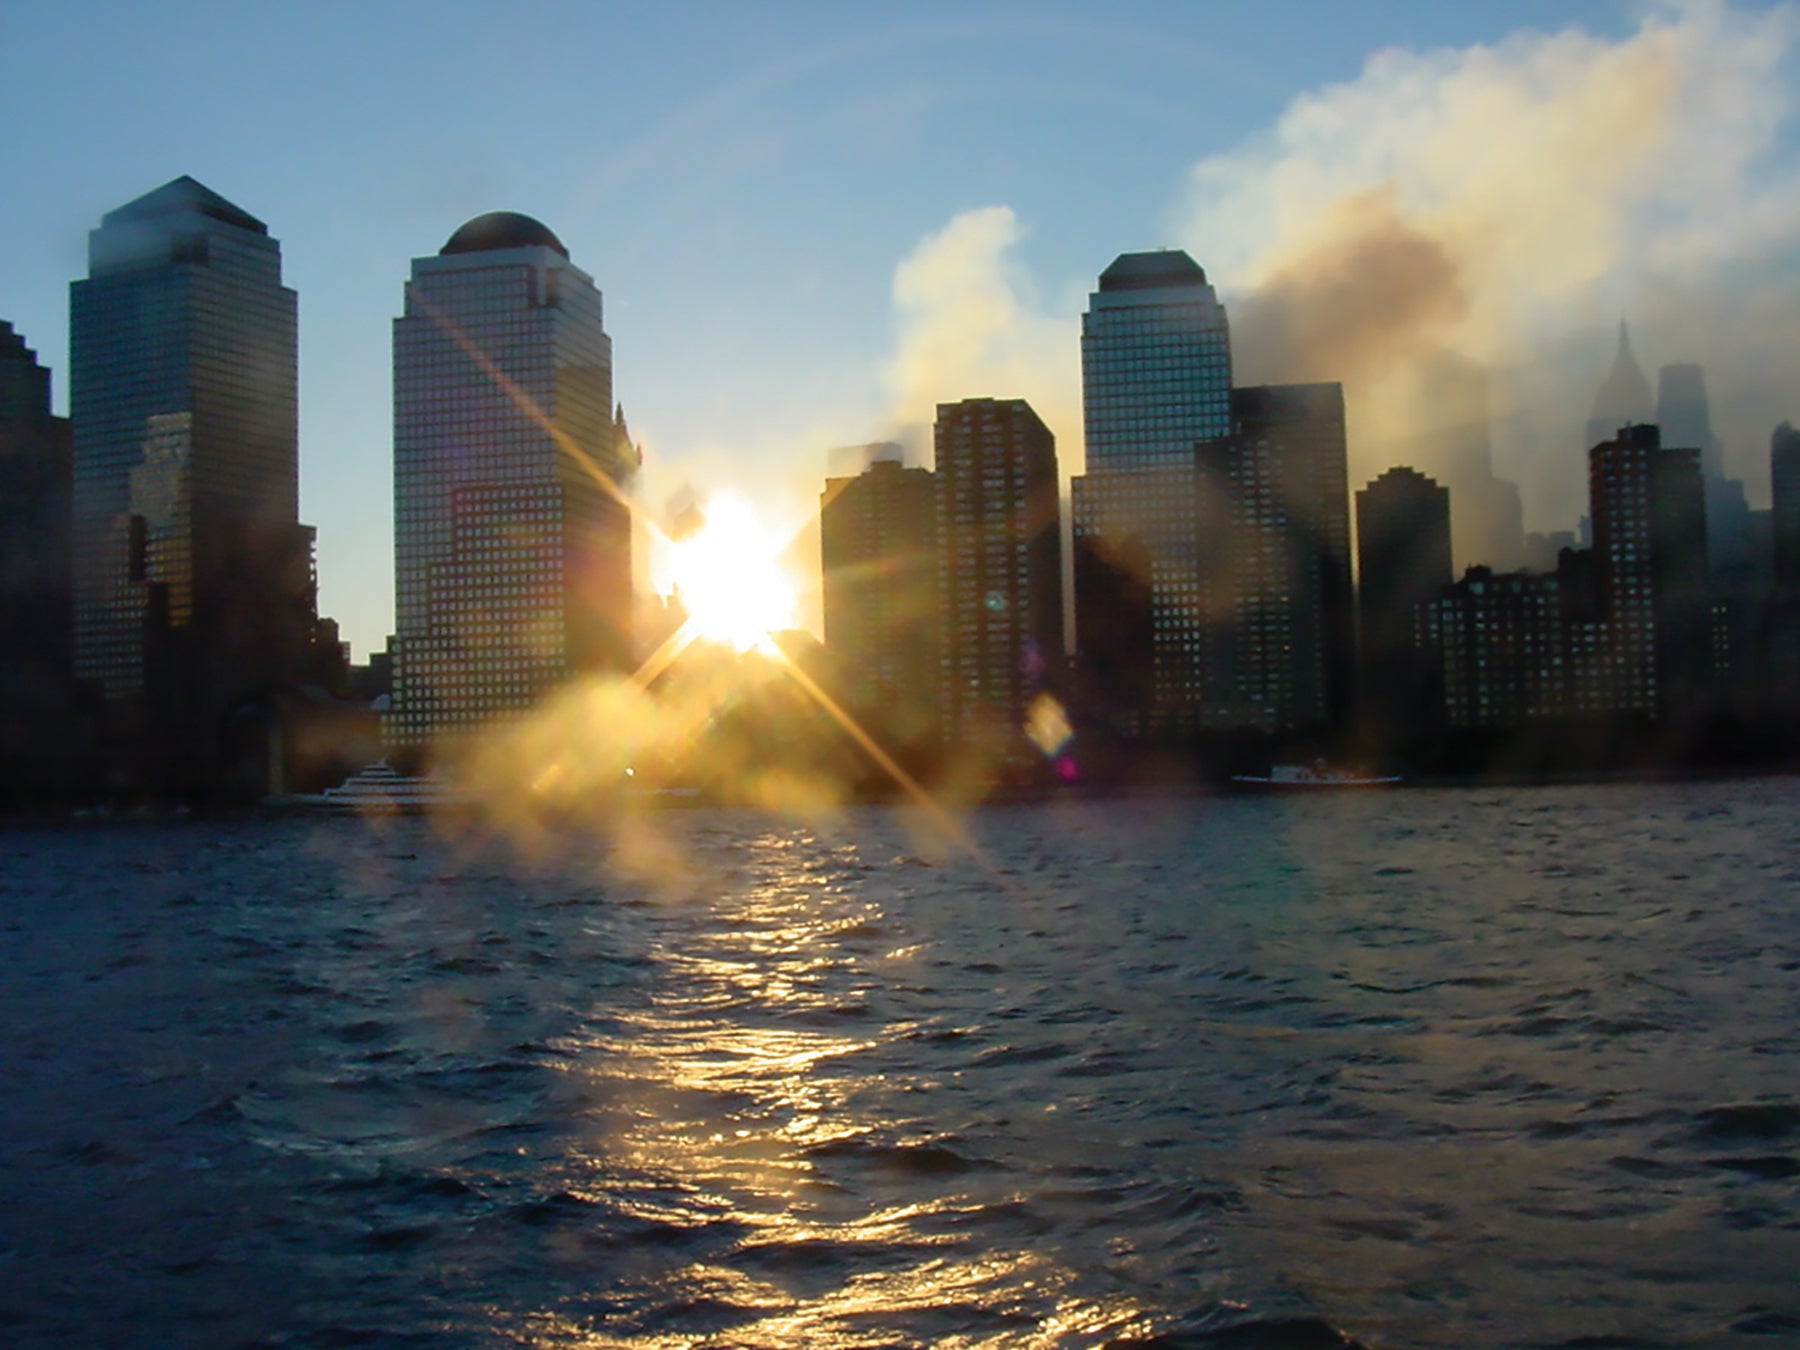 Smoke can still be seen from across the Hudson River on the morning of Sept. 12, 2001, as the rubble that was New York City’s World Trade Center continues to smolder.